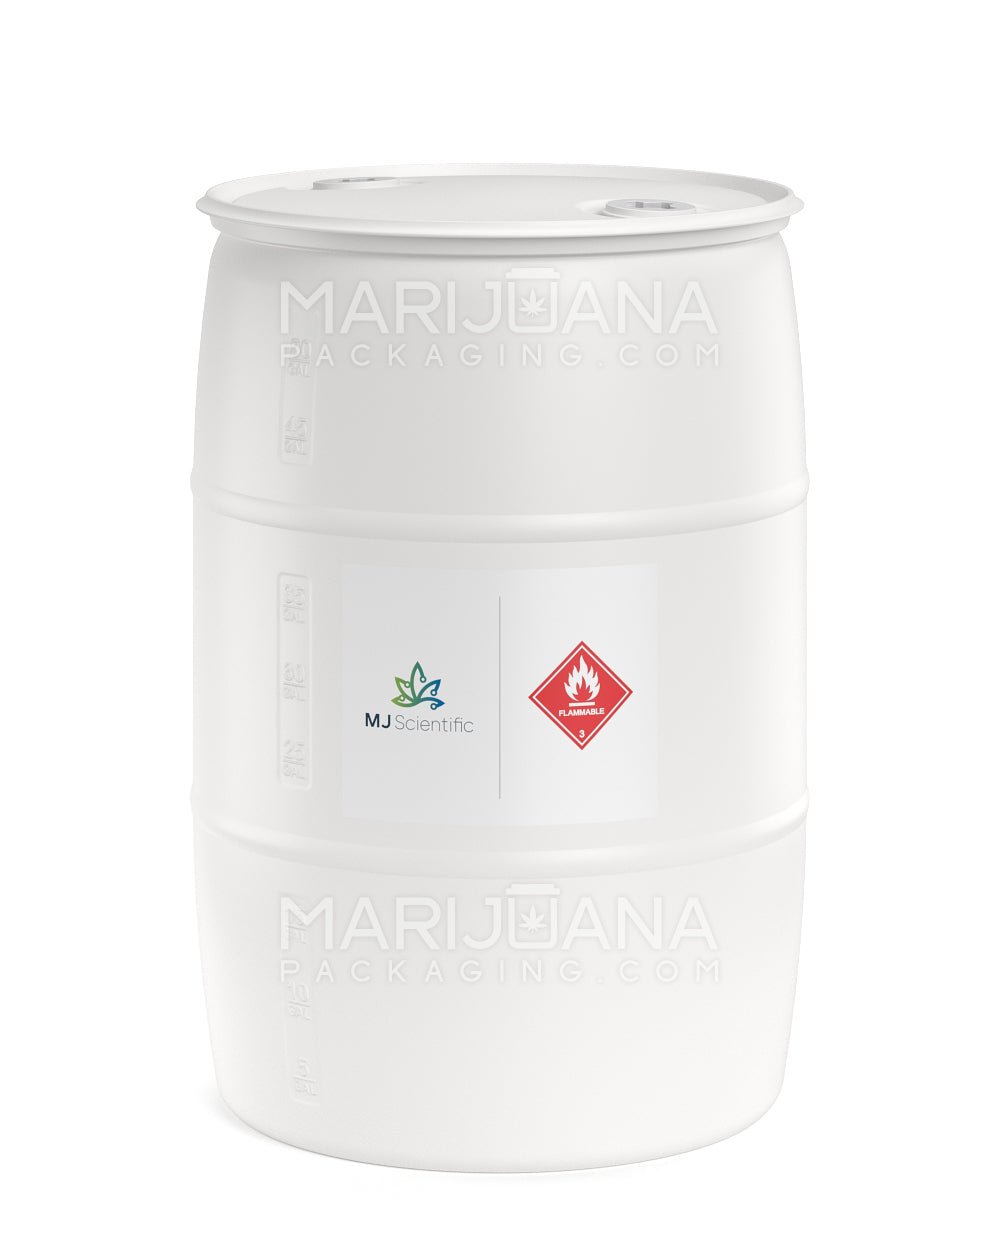 MJ SCIENTIFIC | Liquid Drum 70% Isopropyl Alcohol USP Grade Cleaning & Extraction Solvent | 365lb Net - 55 Gallons - 1